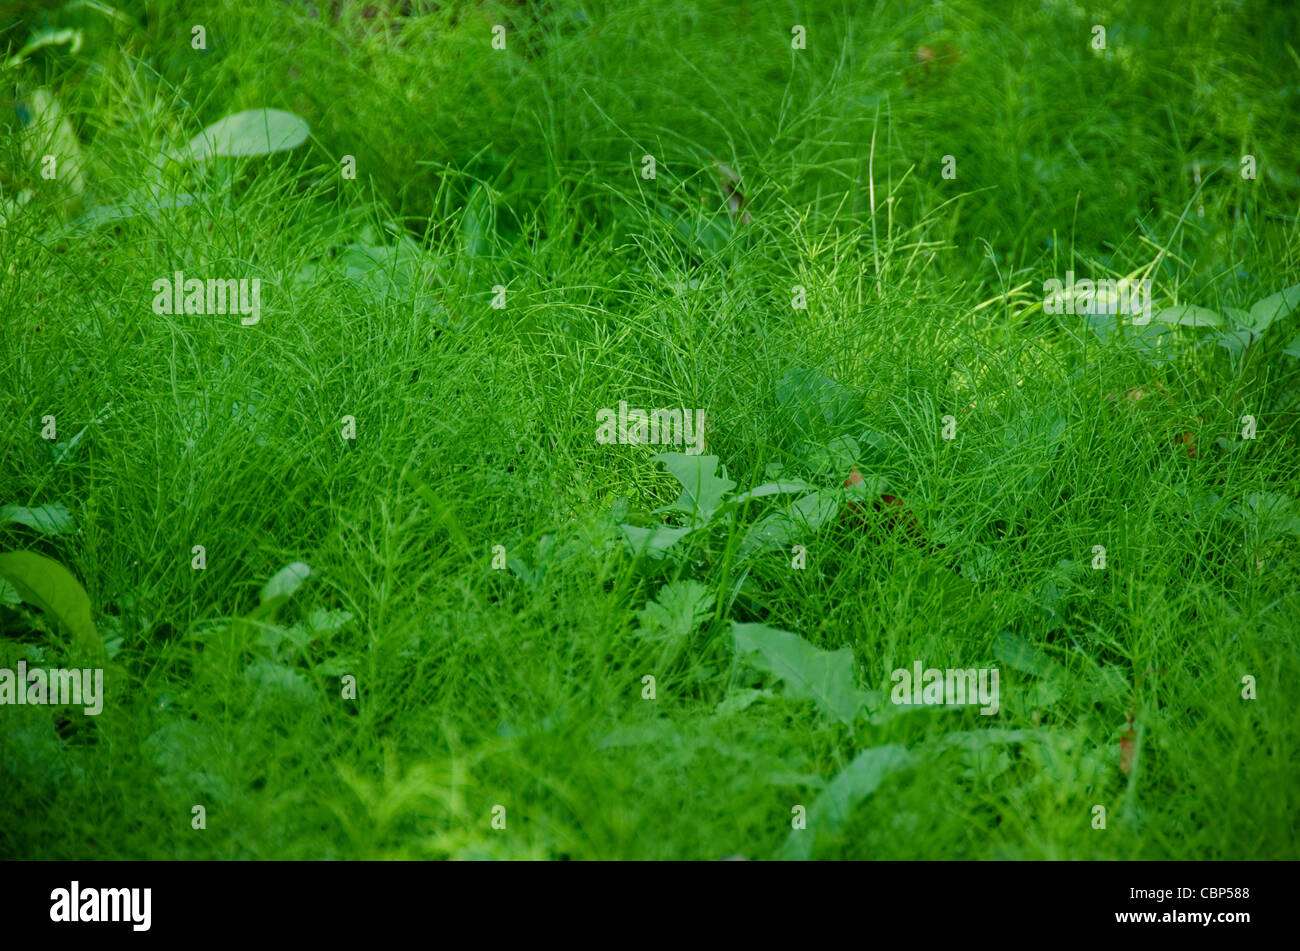 Natural green background composed of Equisetum (horse tail) in the understory of a forest Stock Photo